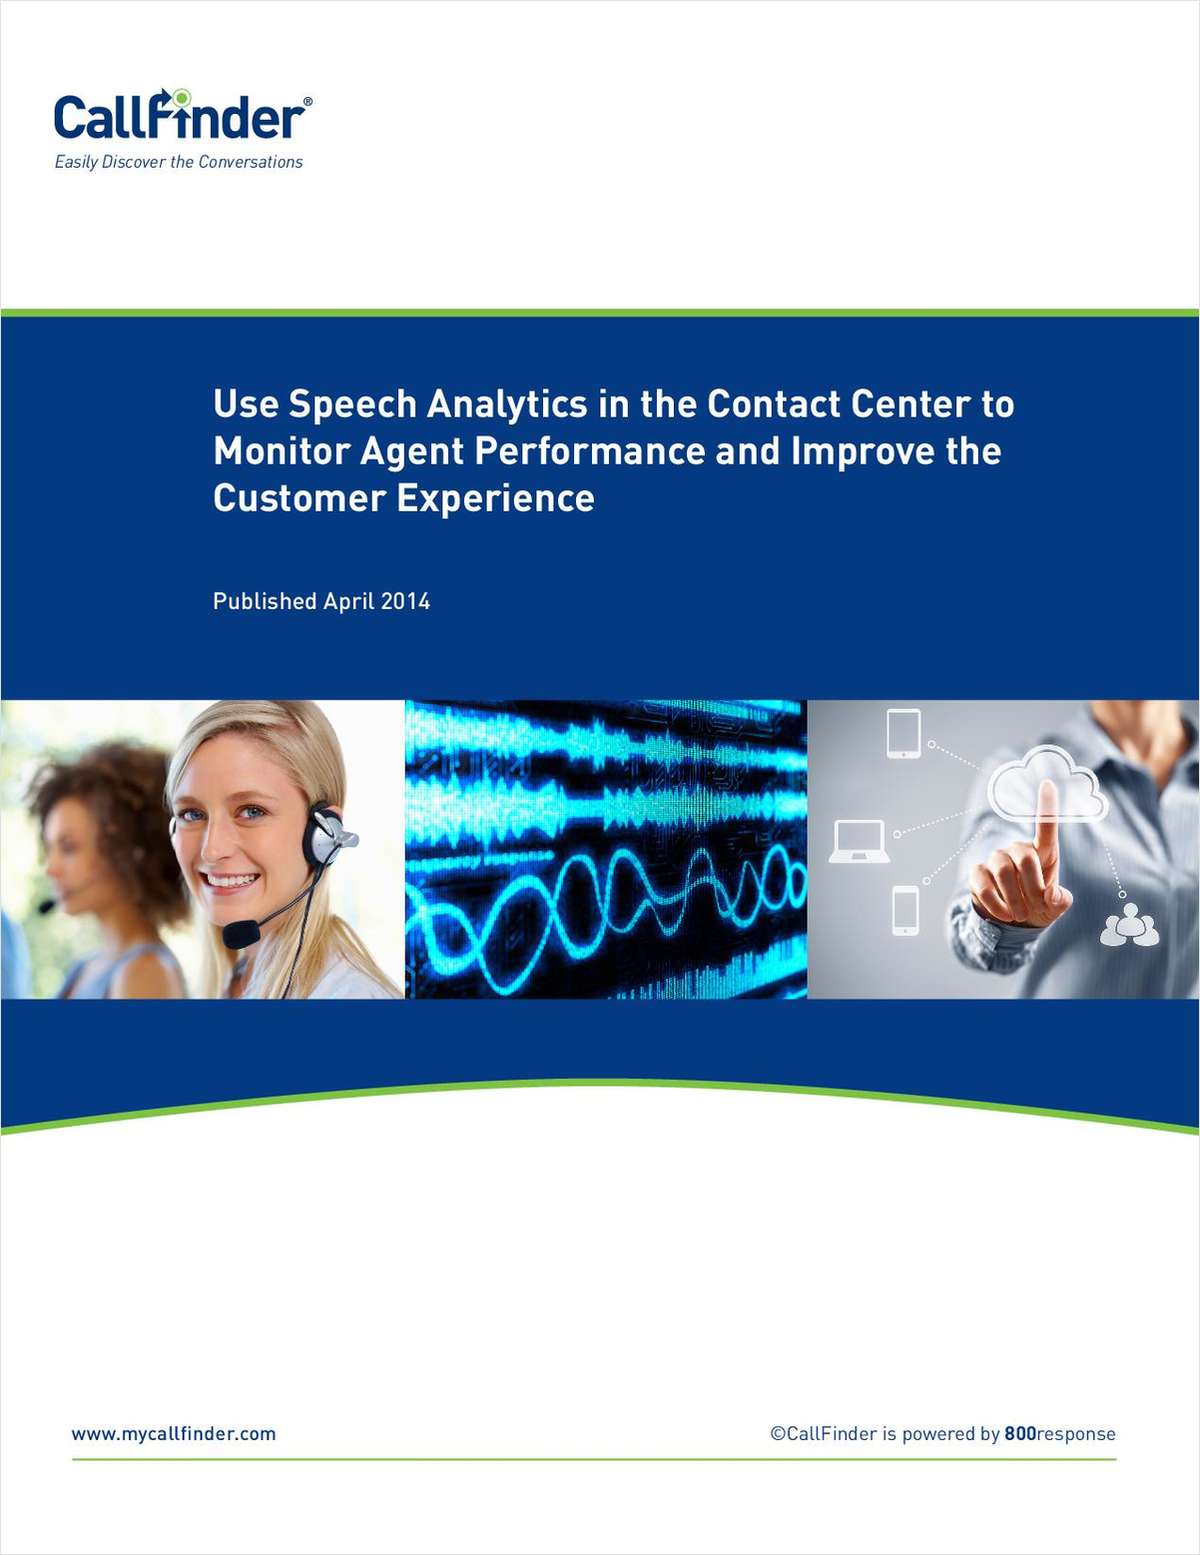 Boost Agent Performance and Elevate the Customer Experience With Speech Analytics